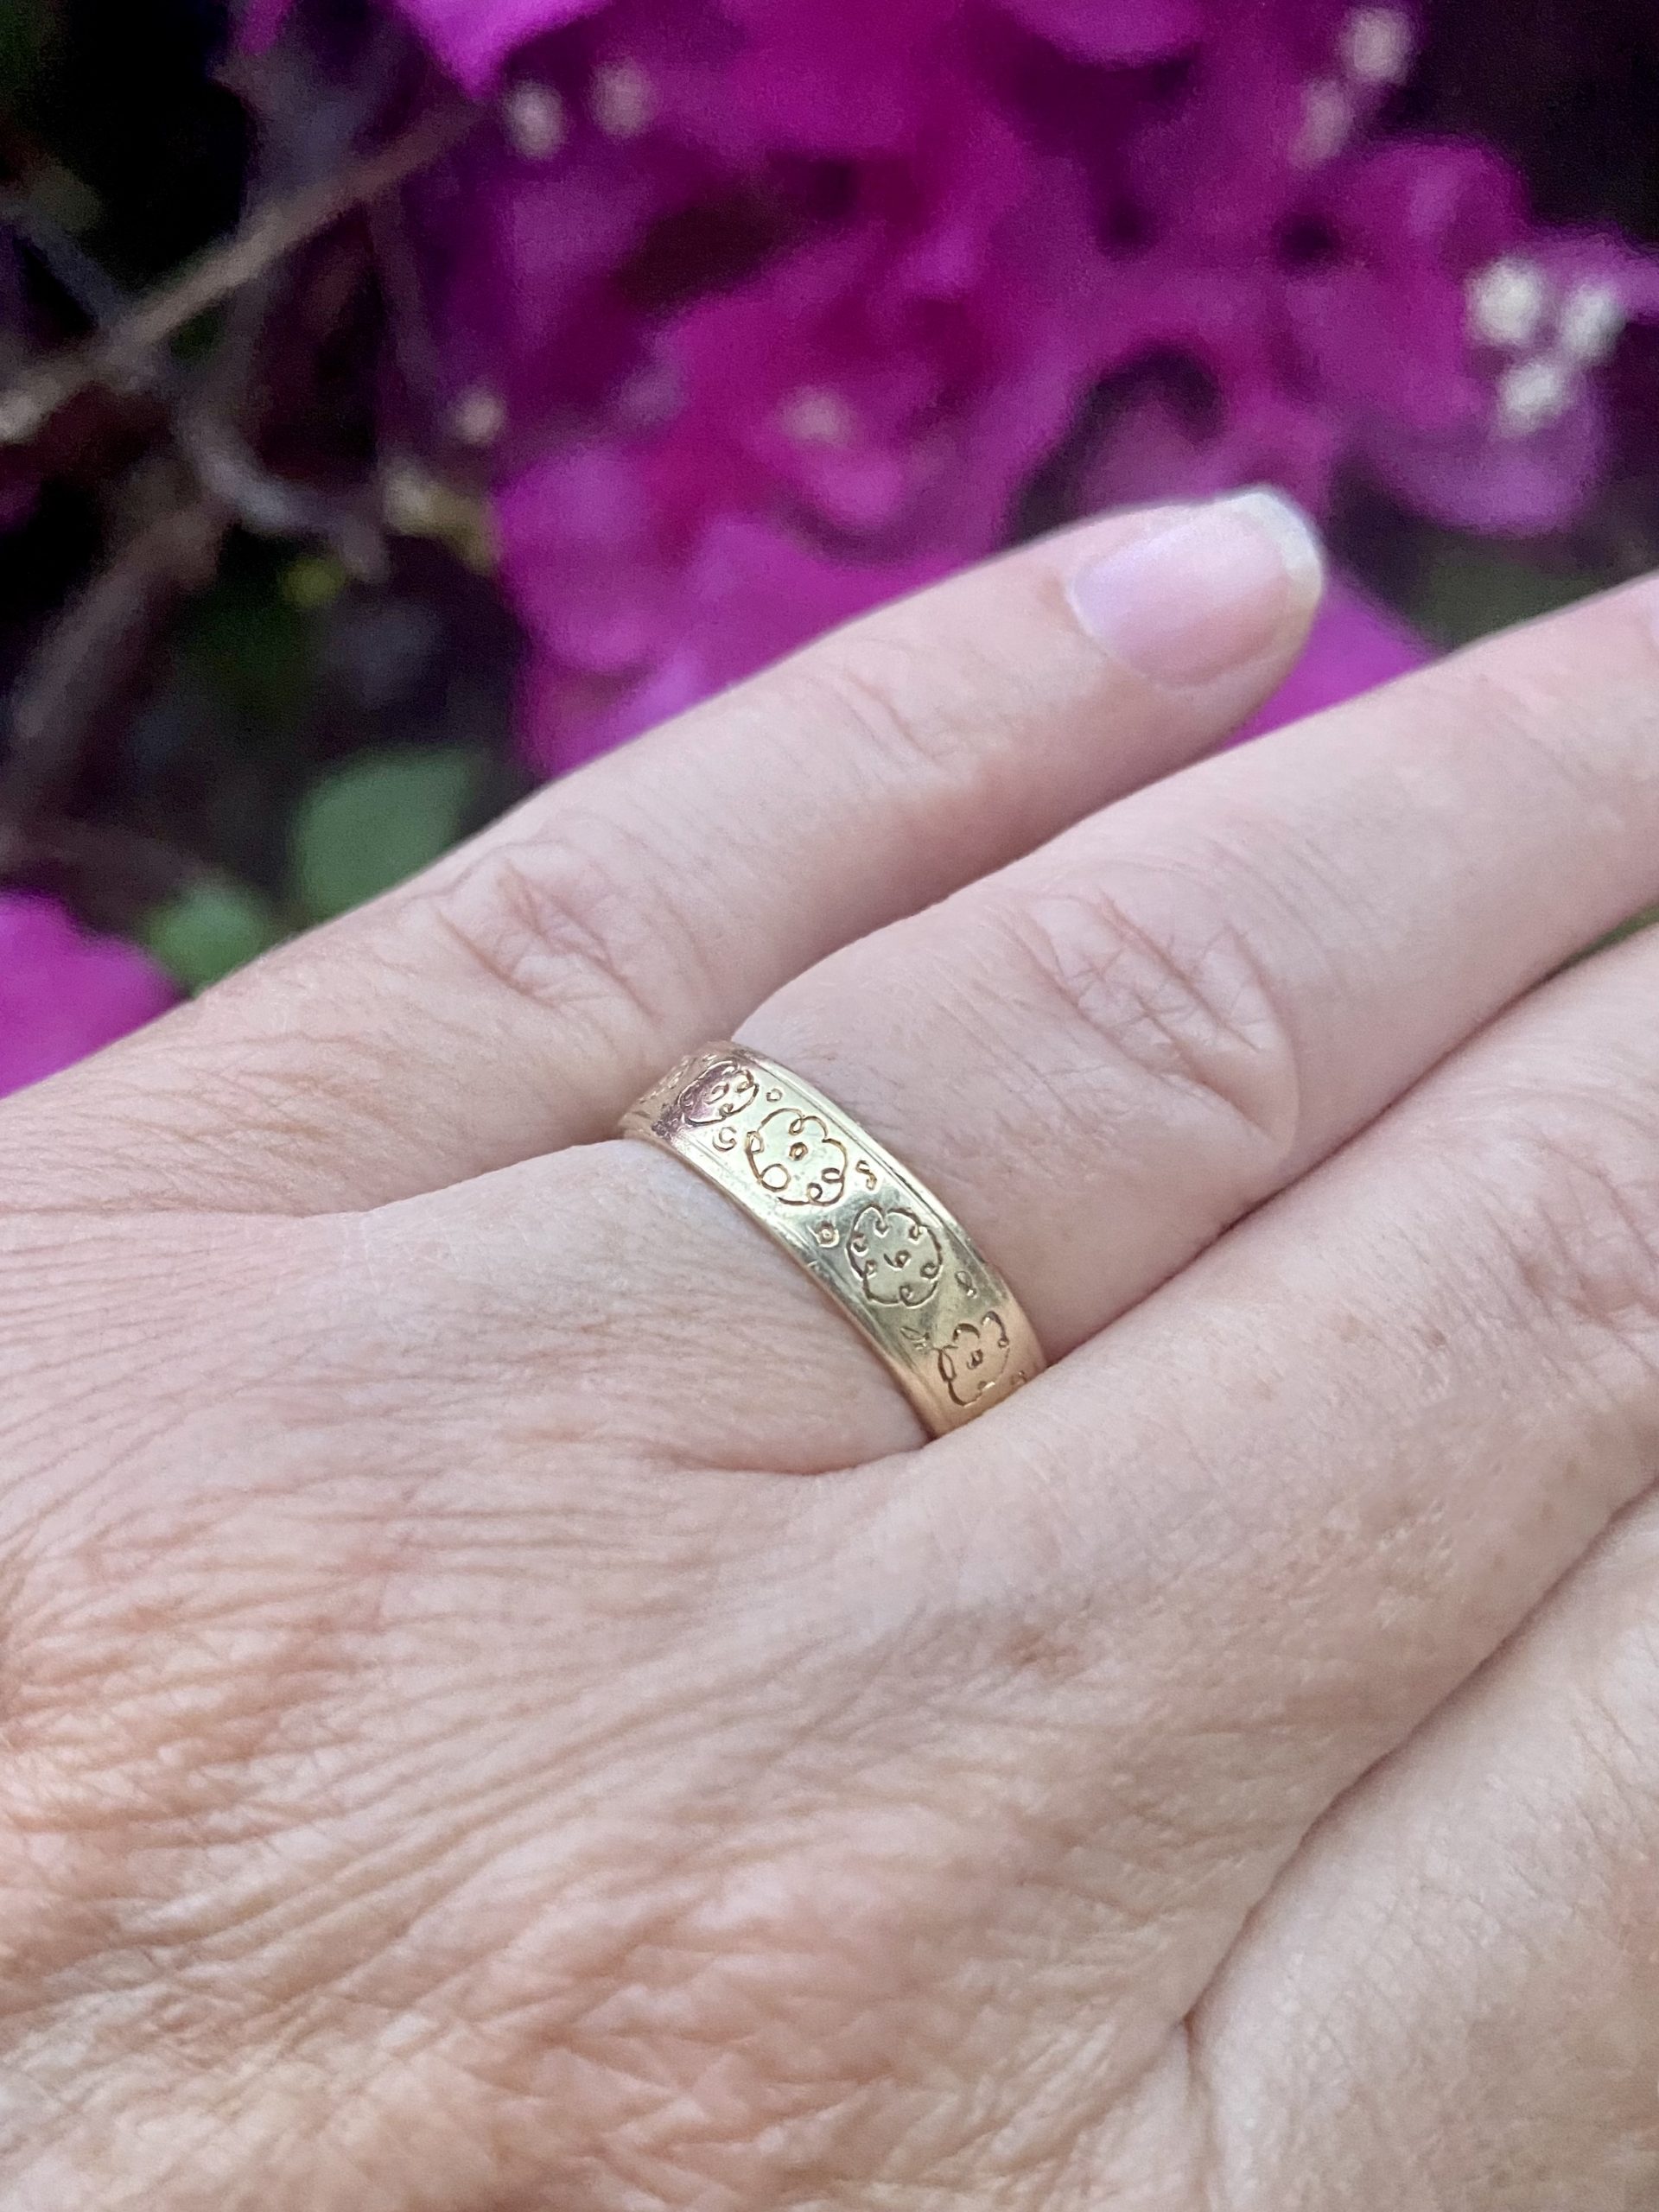 Design from Anywhere | Abby Sparks Jewelry